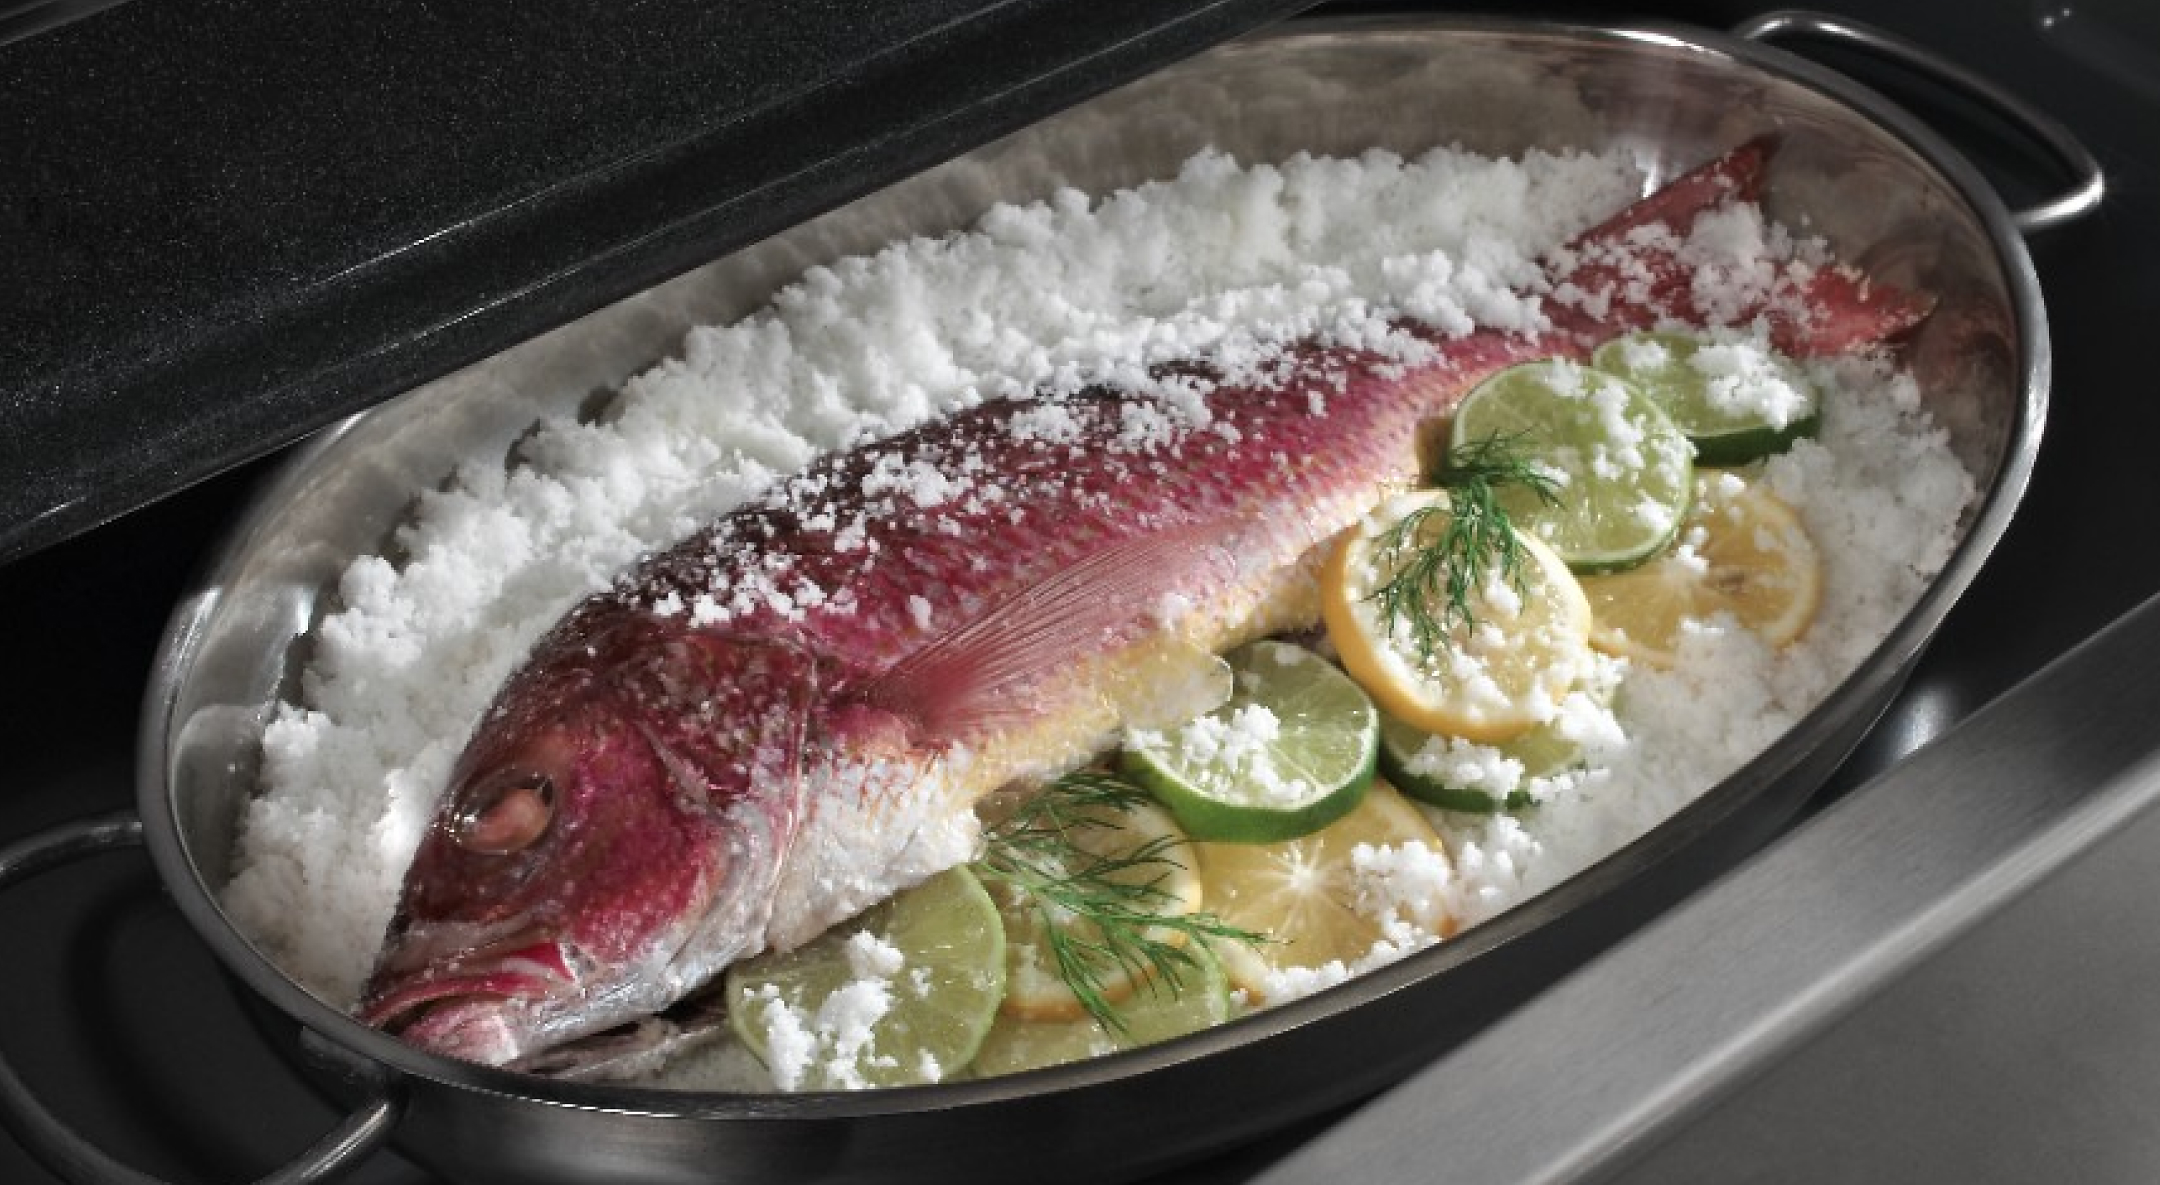 Fish in a large tray in a variety of garnishes